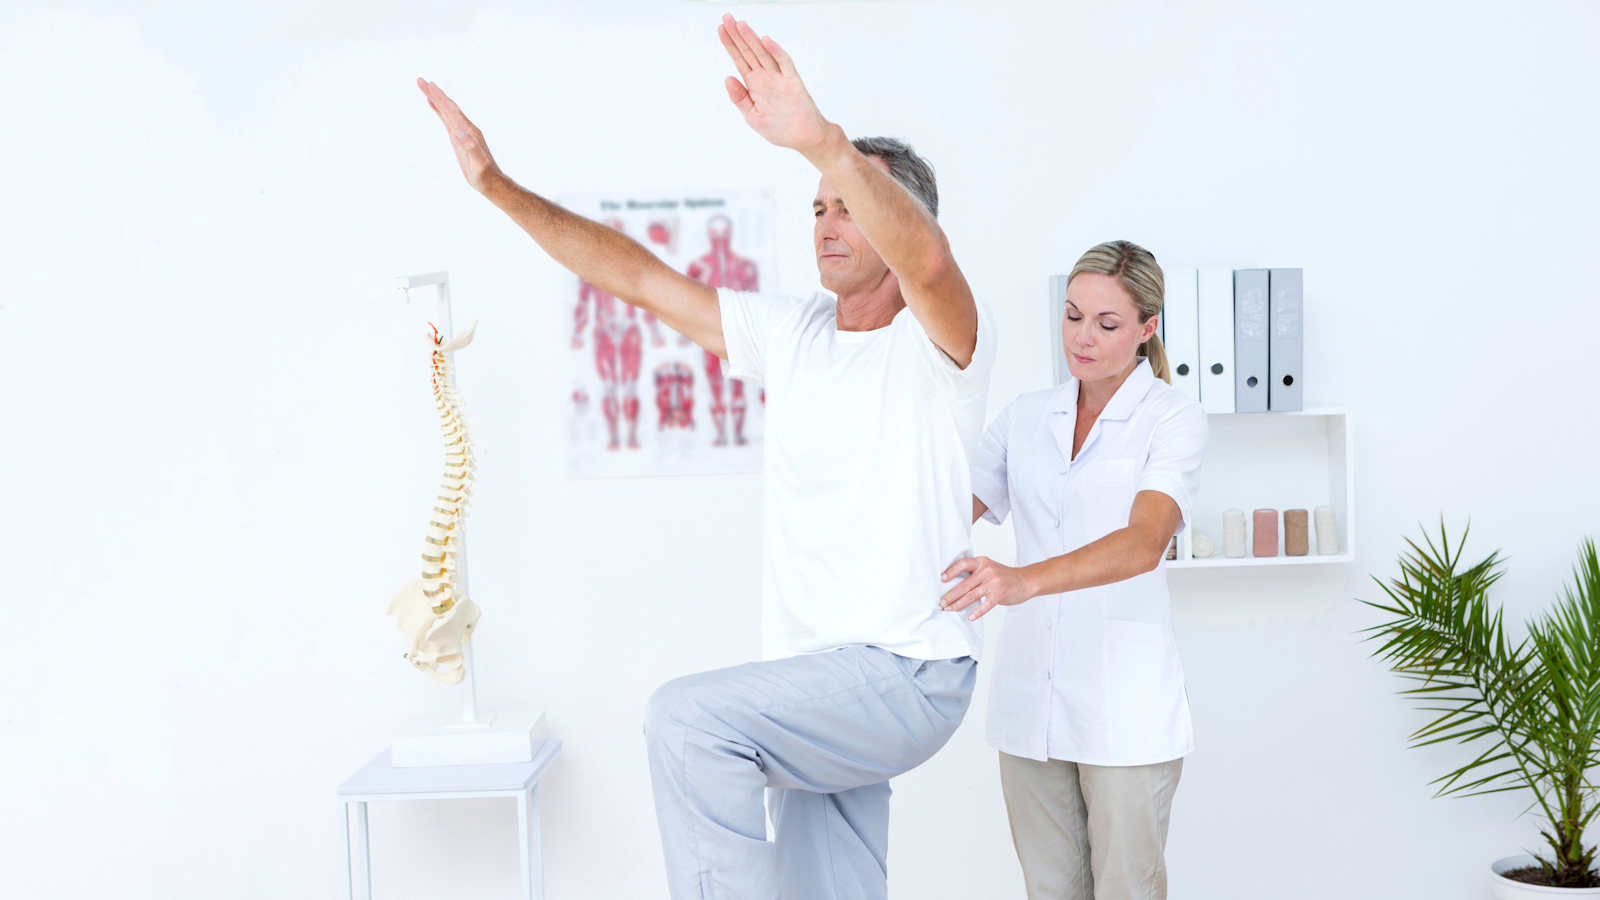 Best Life Chiropractic and Wellness Center of Flower Mound